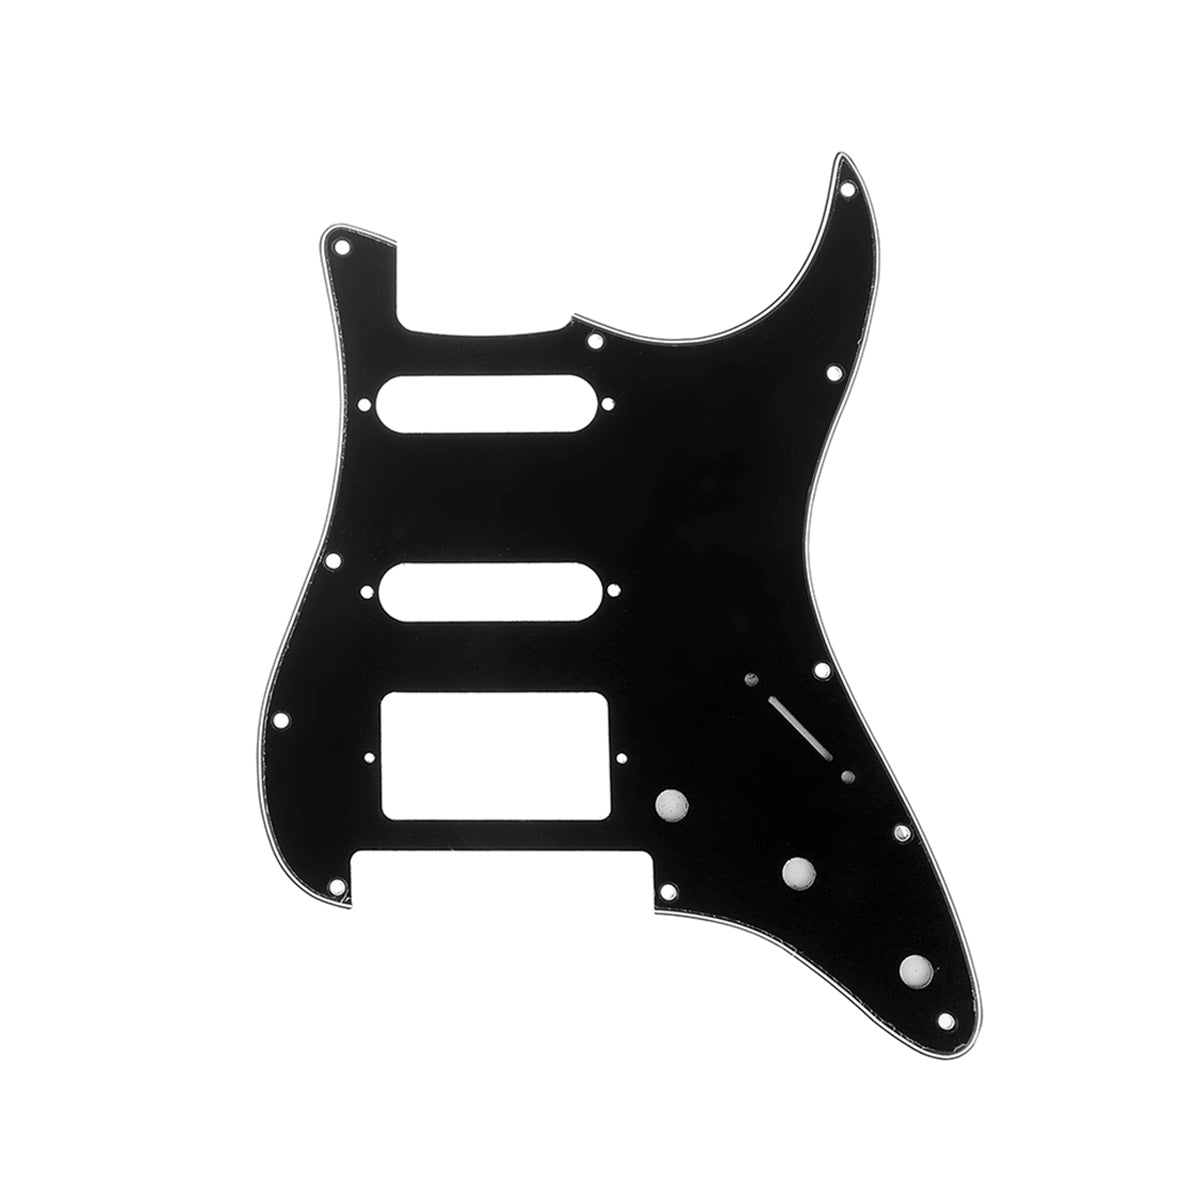 Musiclily Pro 11-Hole Modern Style Strat HSS Guitar Pickguard for American/Mexican Fender Stratocaster Floyd Rose Bridge Cut, 3Ply Black